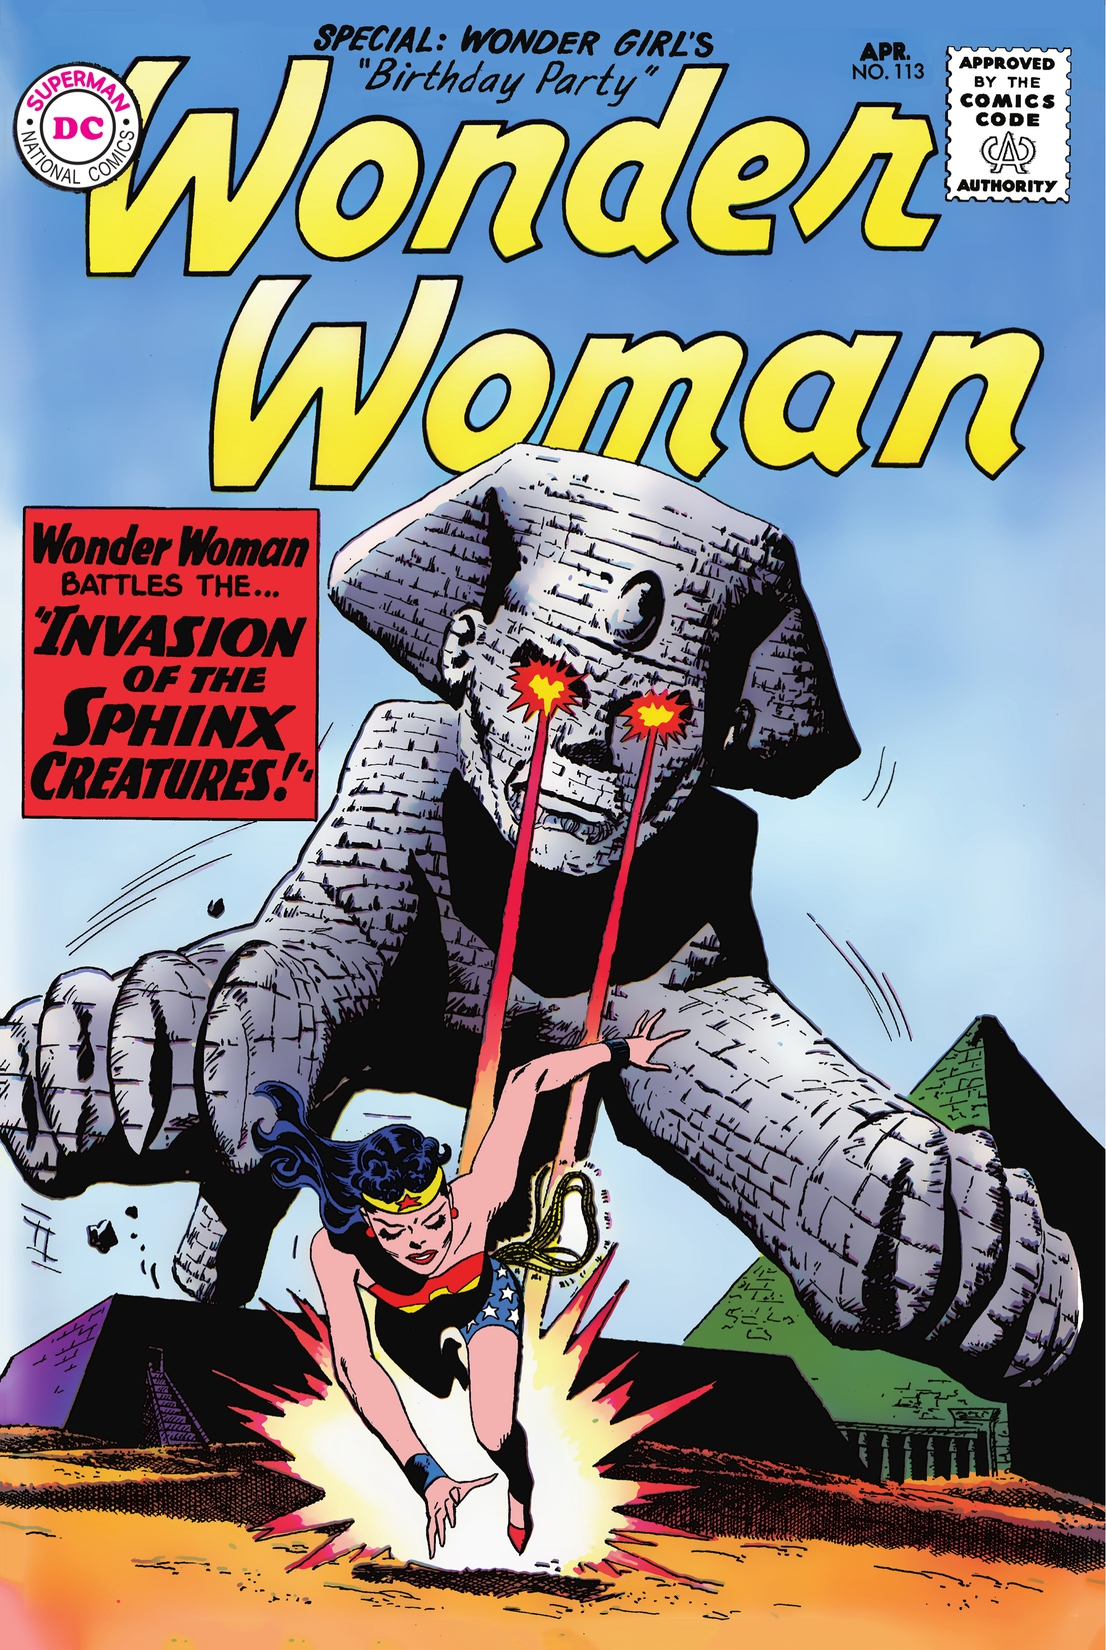 Wonder Woman (1942-) #113 preview images